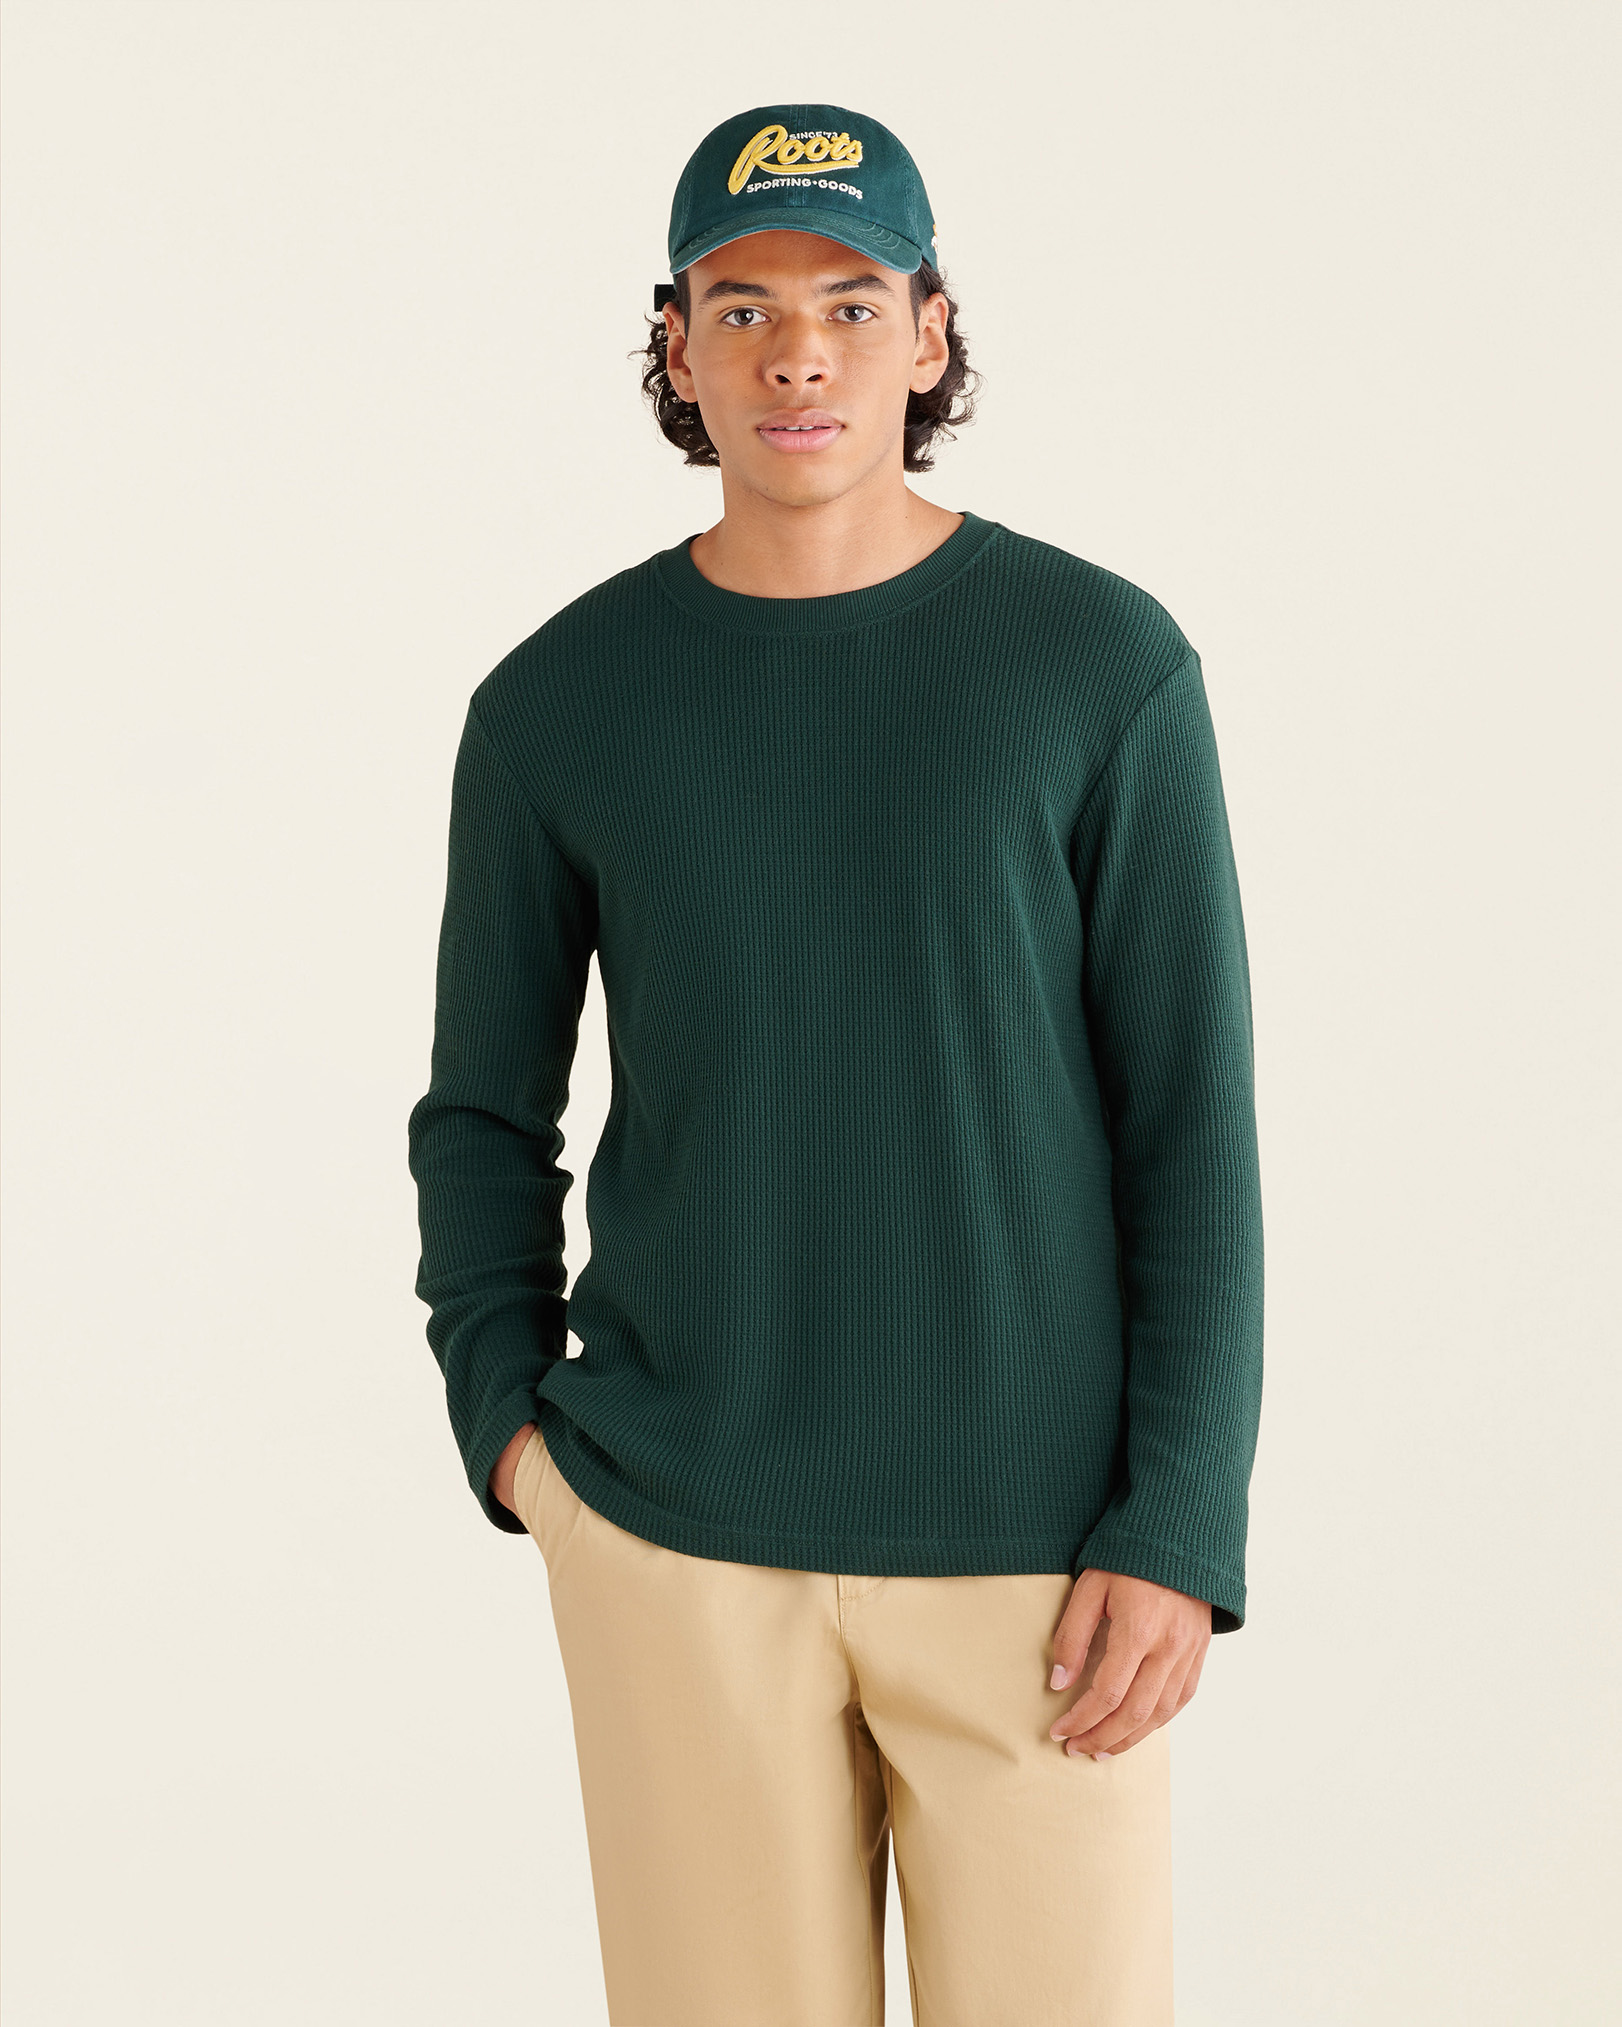 Roots Waffle Long Sleeve Crew Top in Varsity Green